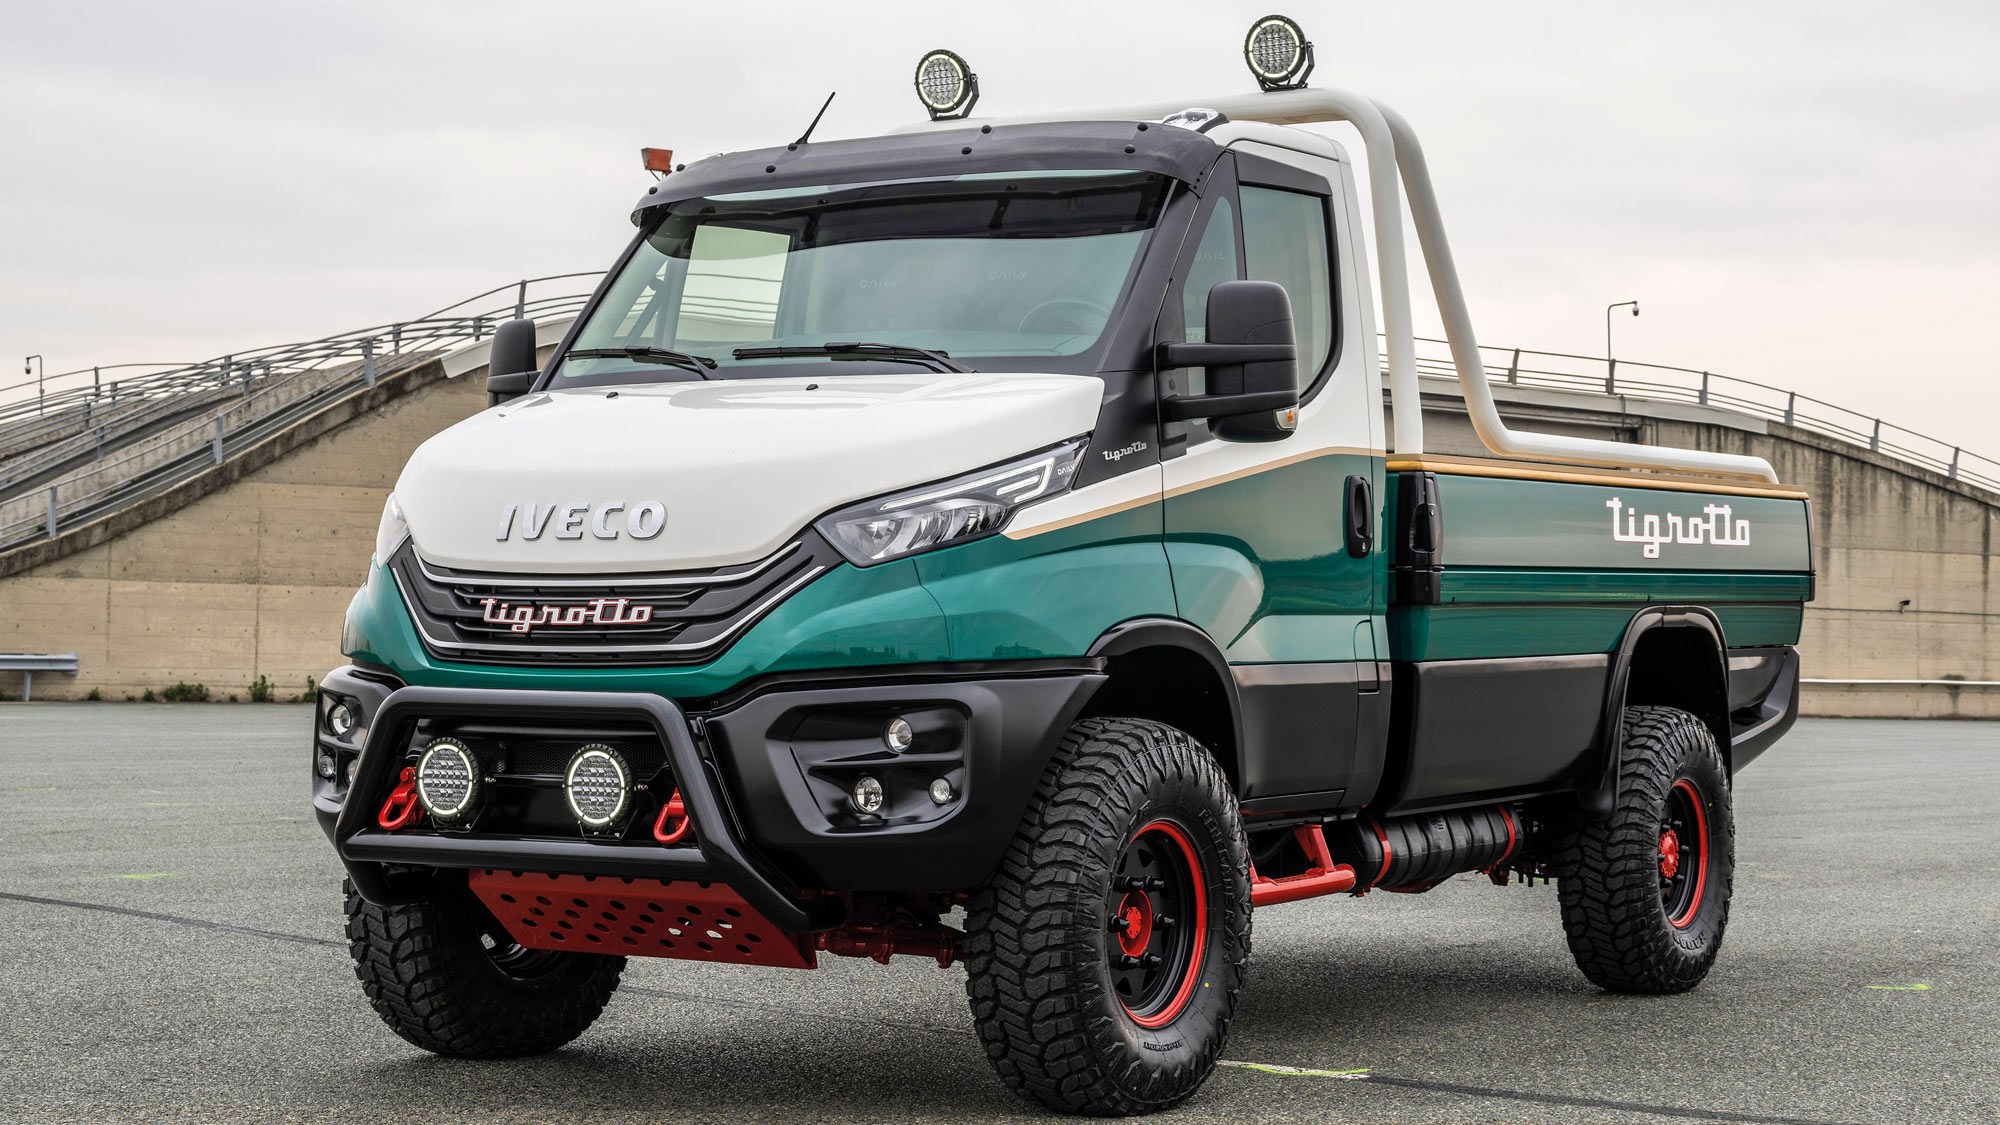 https://car-images.bauersecure.com/wp-images/165850/090-iveco-daily-4x4-tigrotto-front.jpg